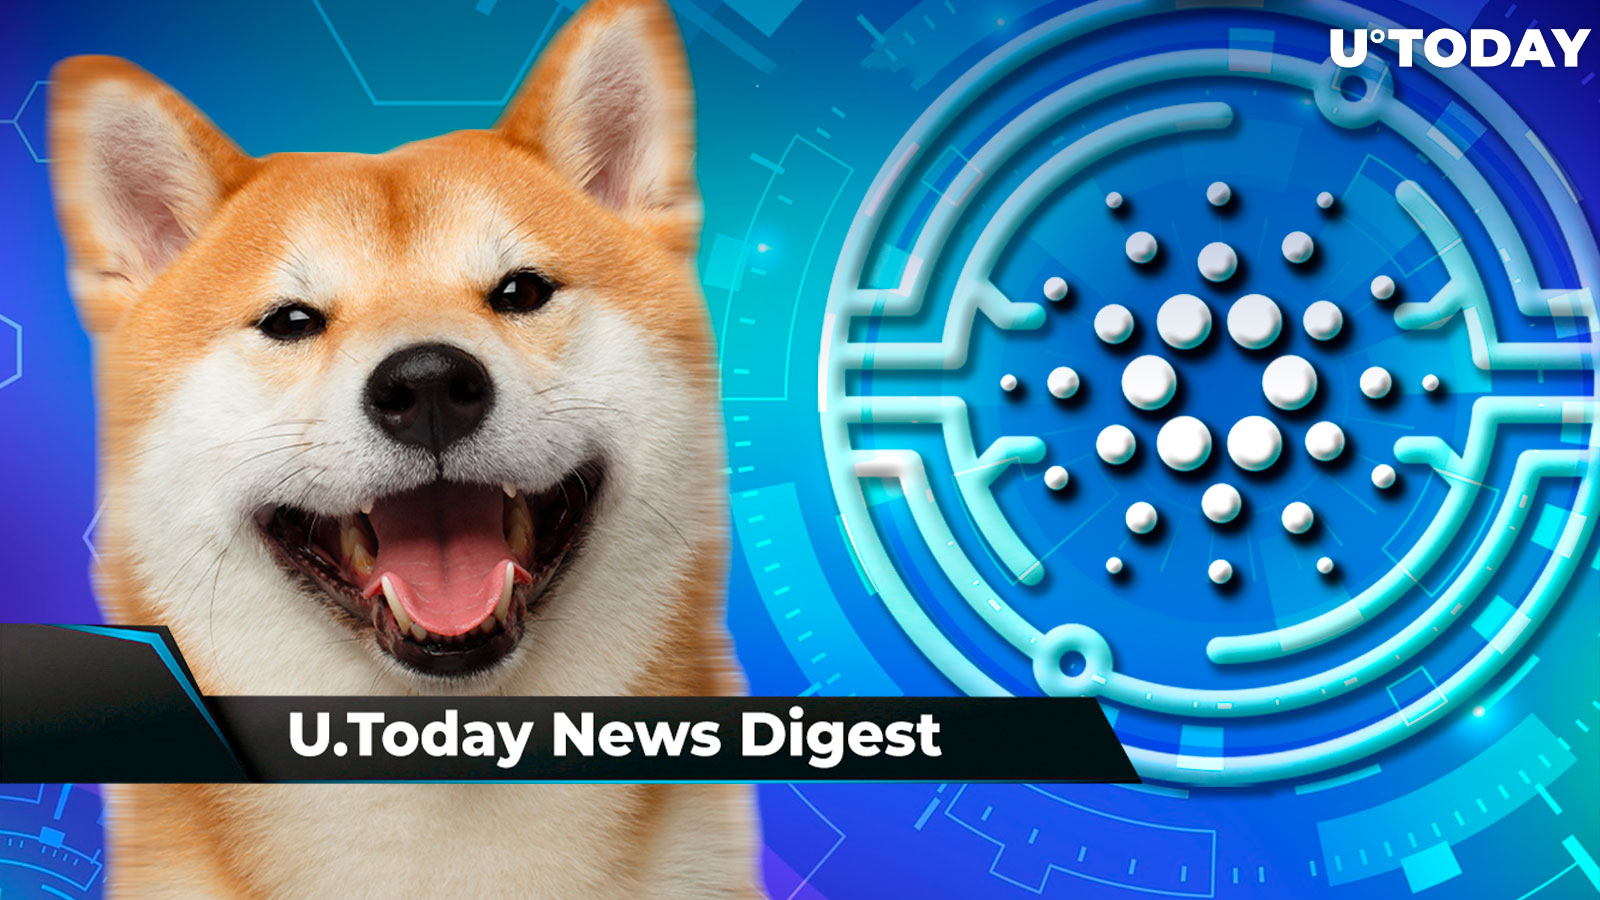 SHIB’s Lead Dev Teases Community, Cardano’s Vasil Goes Live on Testnet, Singapore to Restrict Leverage Trading: Crypto News Digest by U.Today